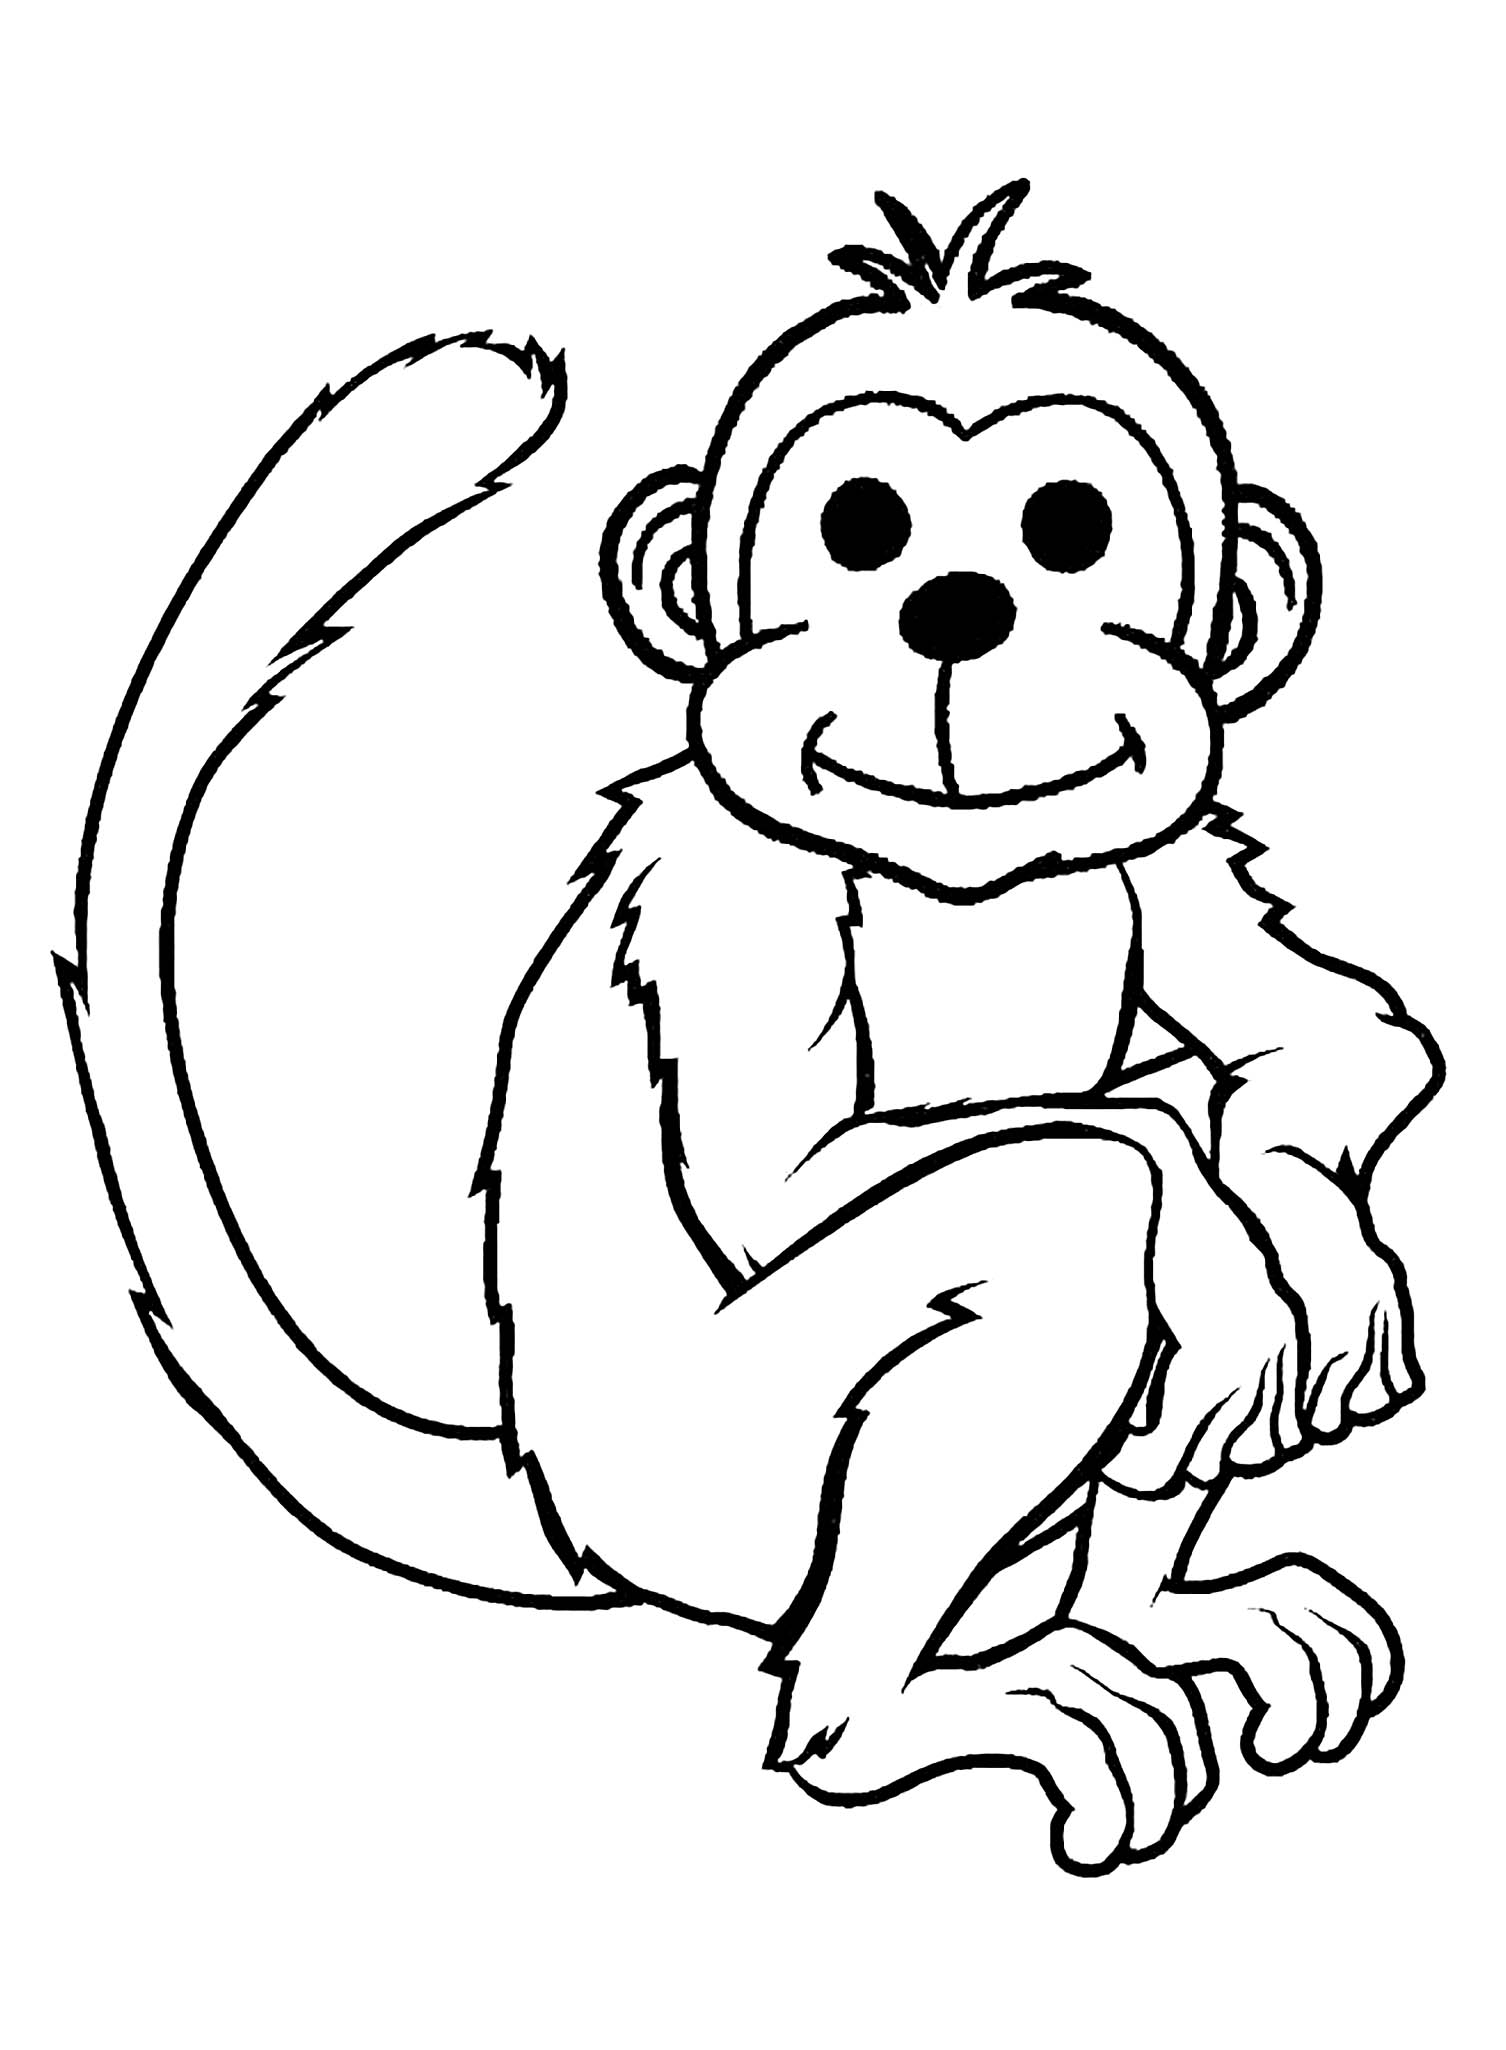 monkey-coloring-pages-to-print-monkeys-kids-coloring-pages